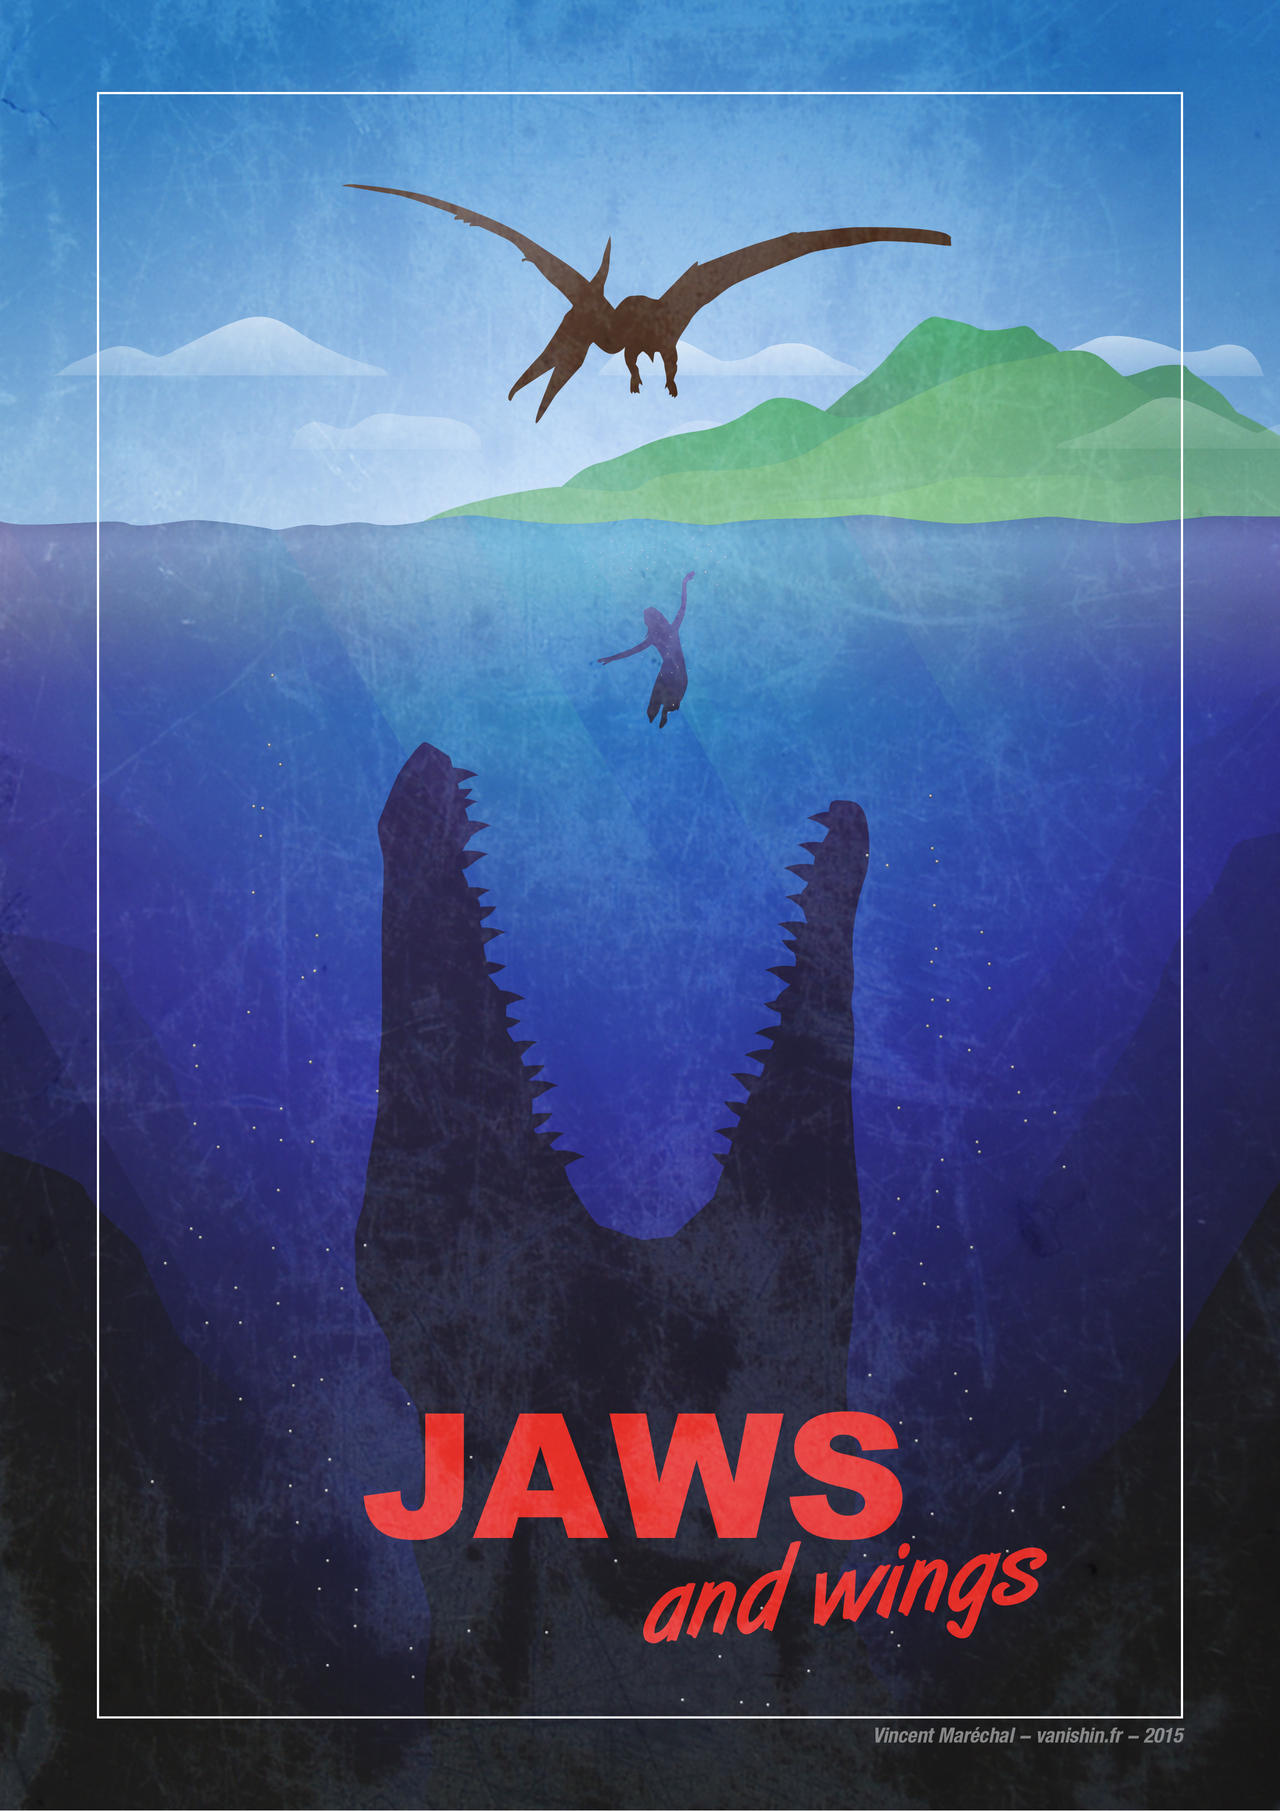 jurassic_world__or_jaws_and_wings___by_vanishin-d8xiiz3.jpg